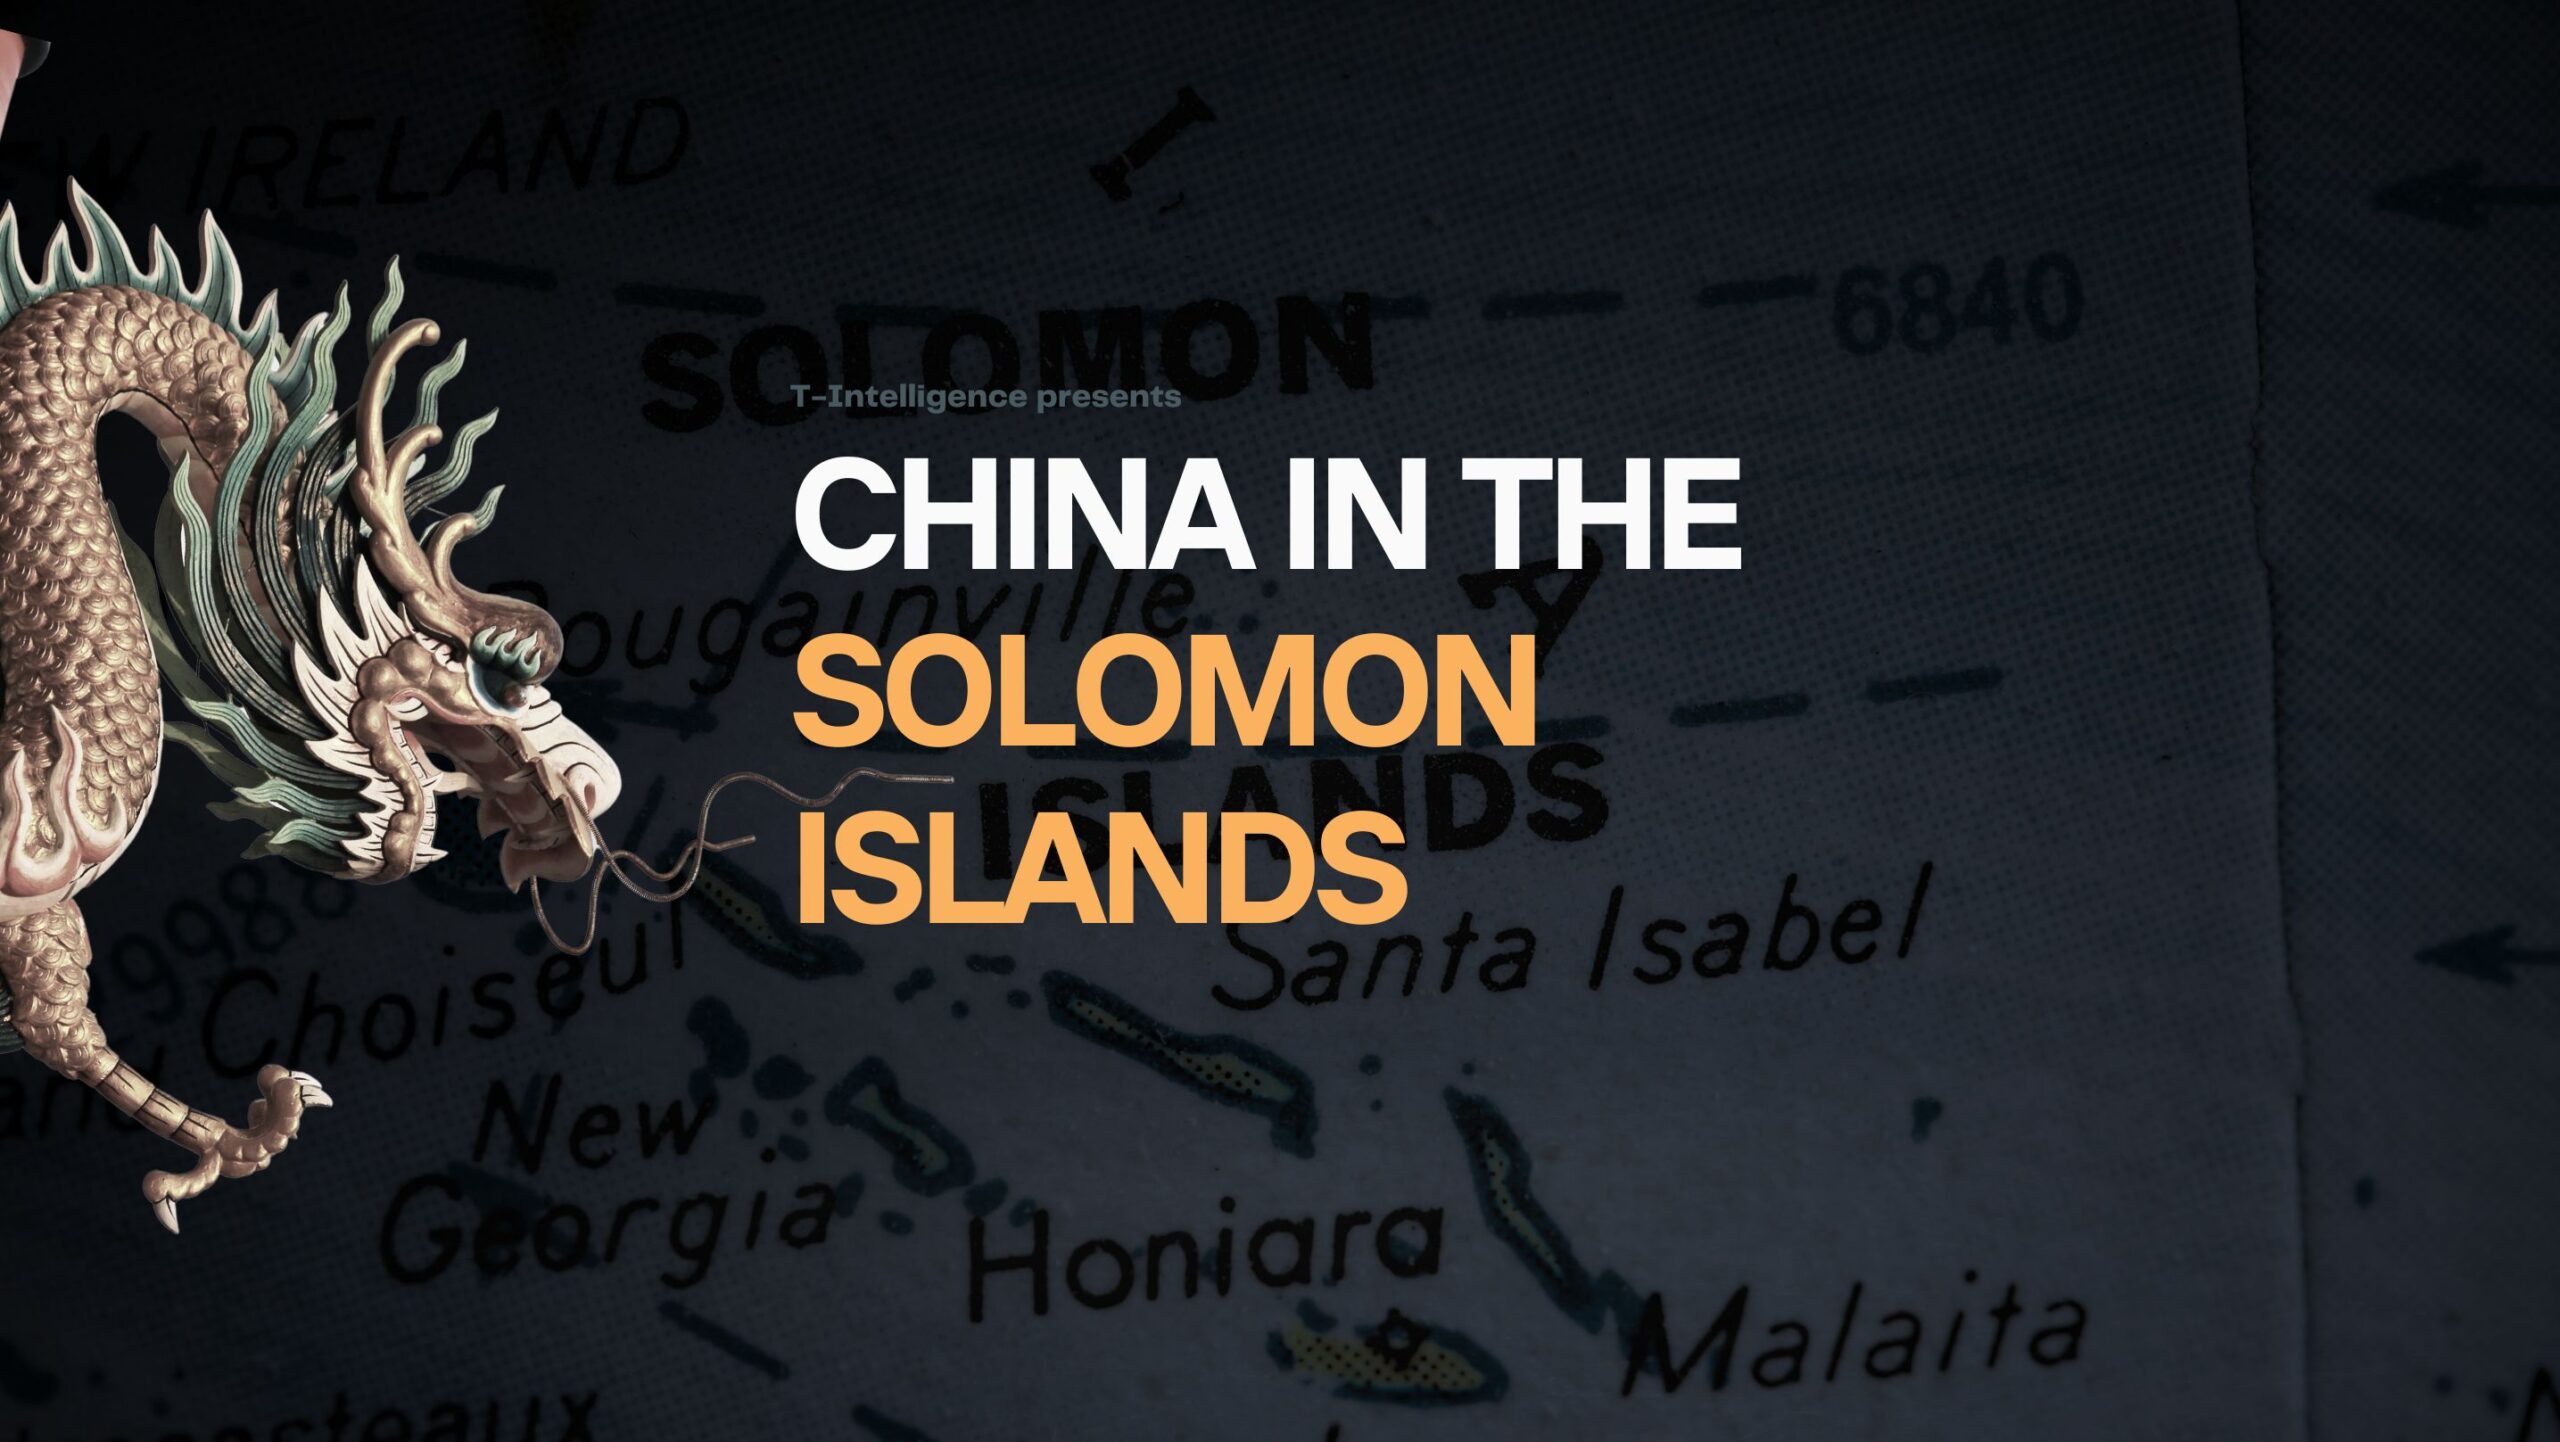 China in the Solomon Islands: Belt & Road Initiative Expands into the South Pacific